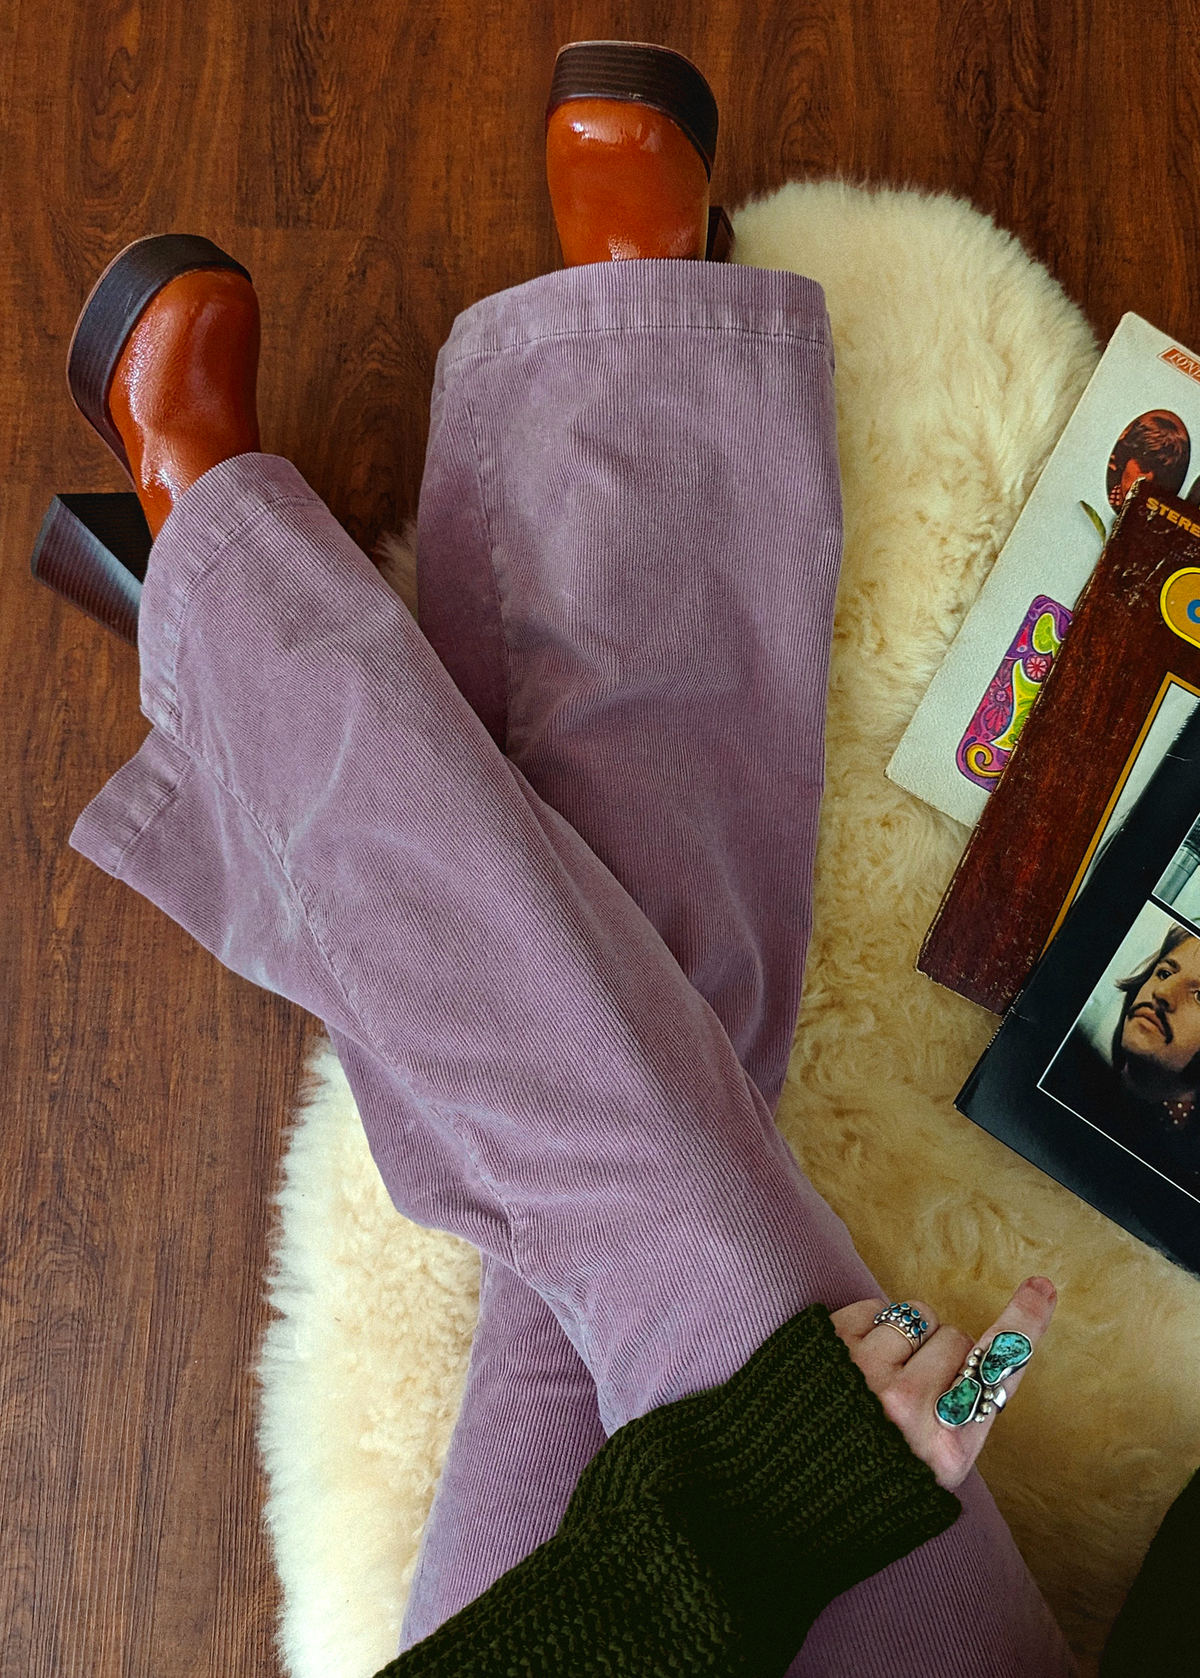 70s inspired Dusty Plum purple corduroy Eastcoast Flares with high rise waist by Rolla's Jeans